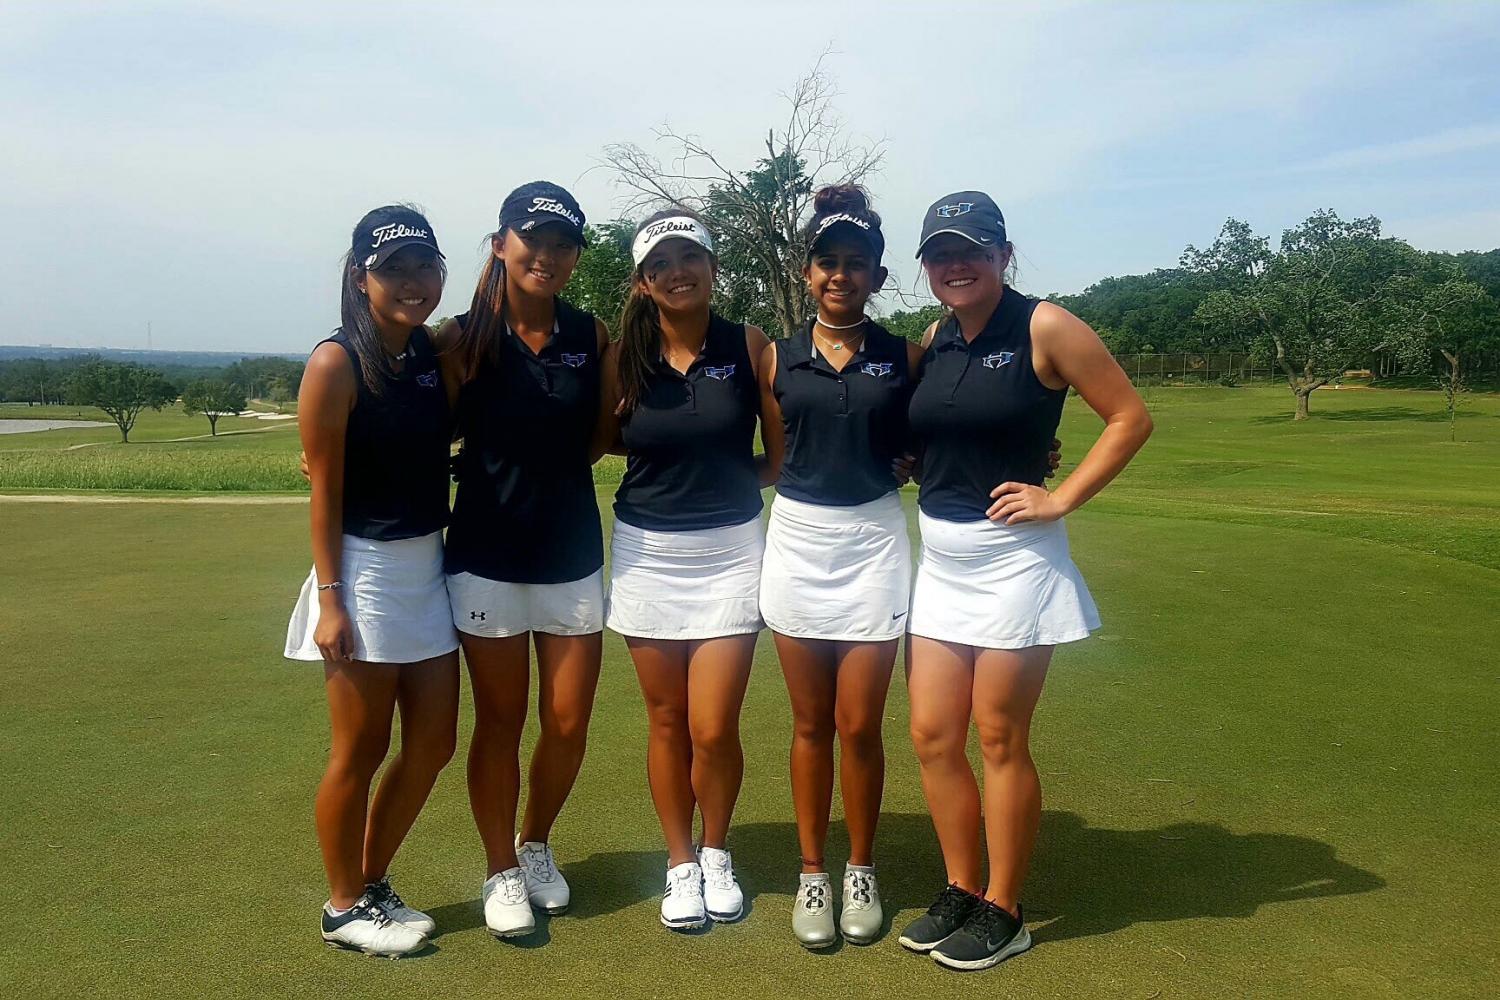 Girls golf to compete at state competition